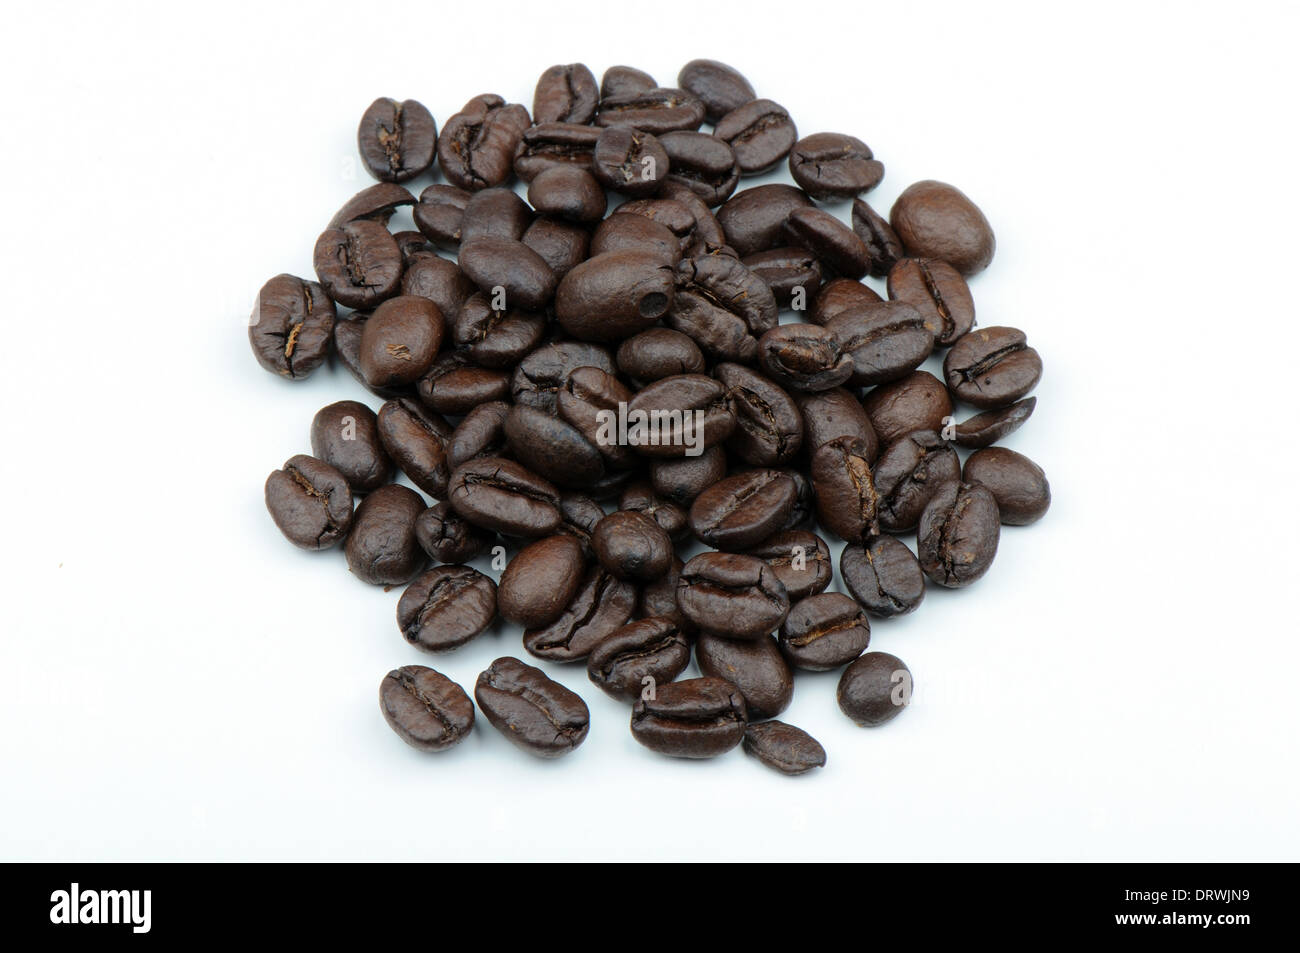 Coffee beans on neutral background. Stock Photo